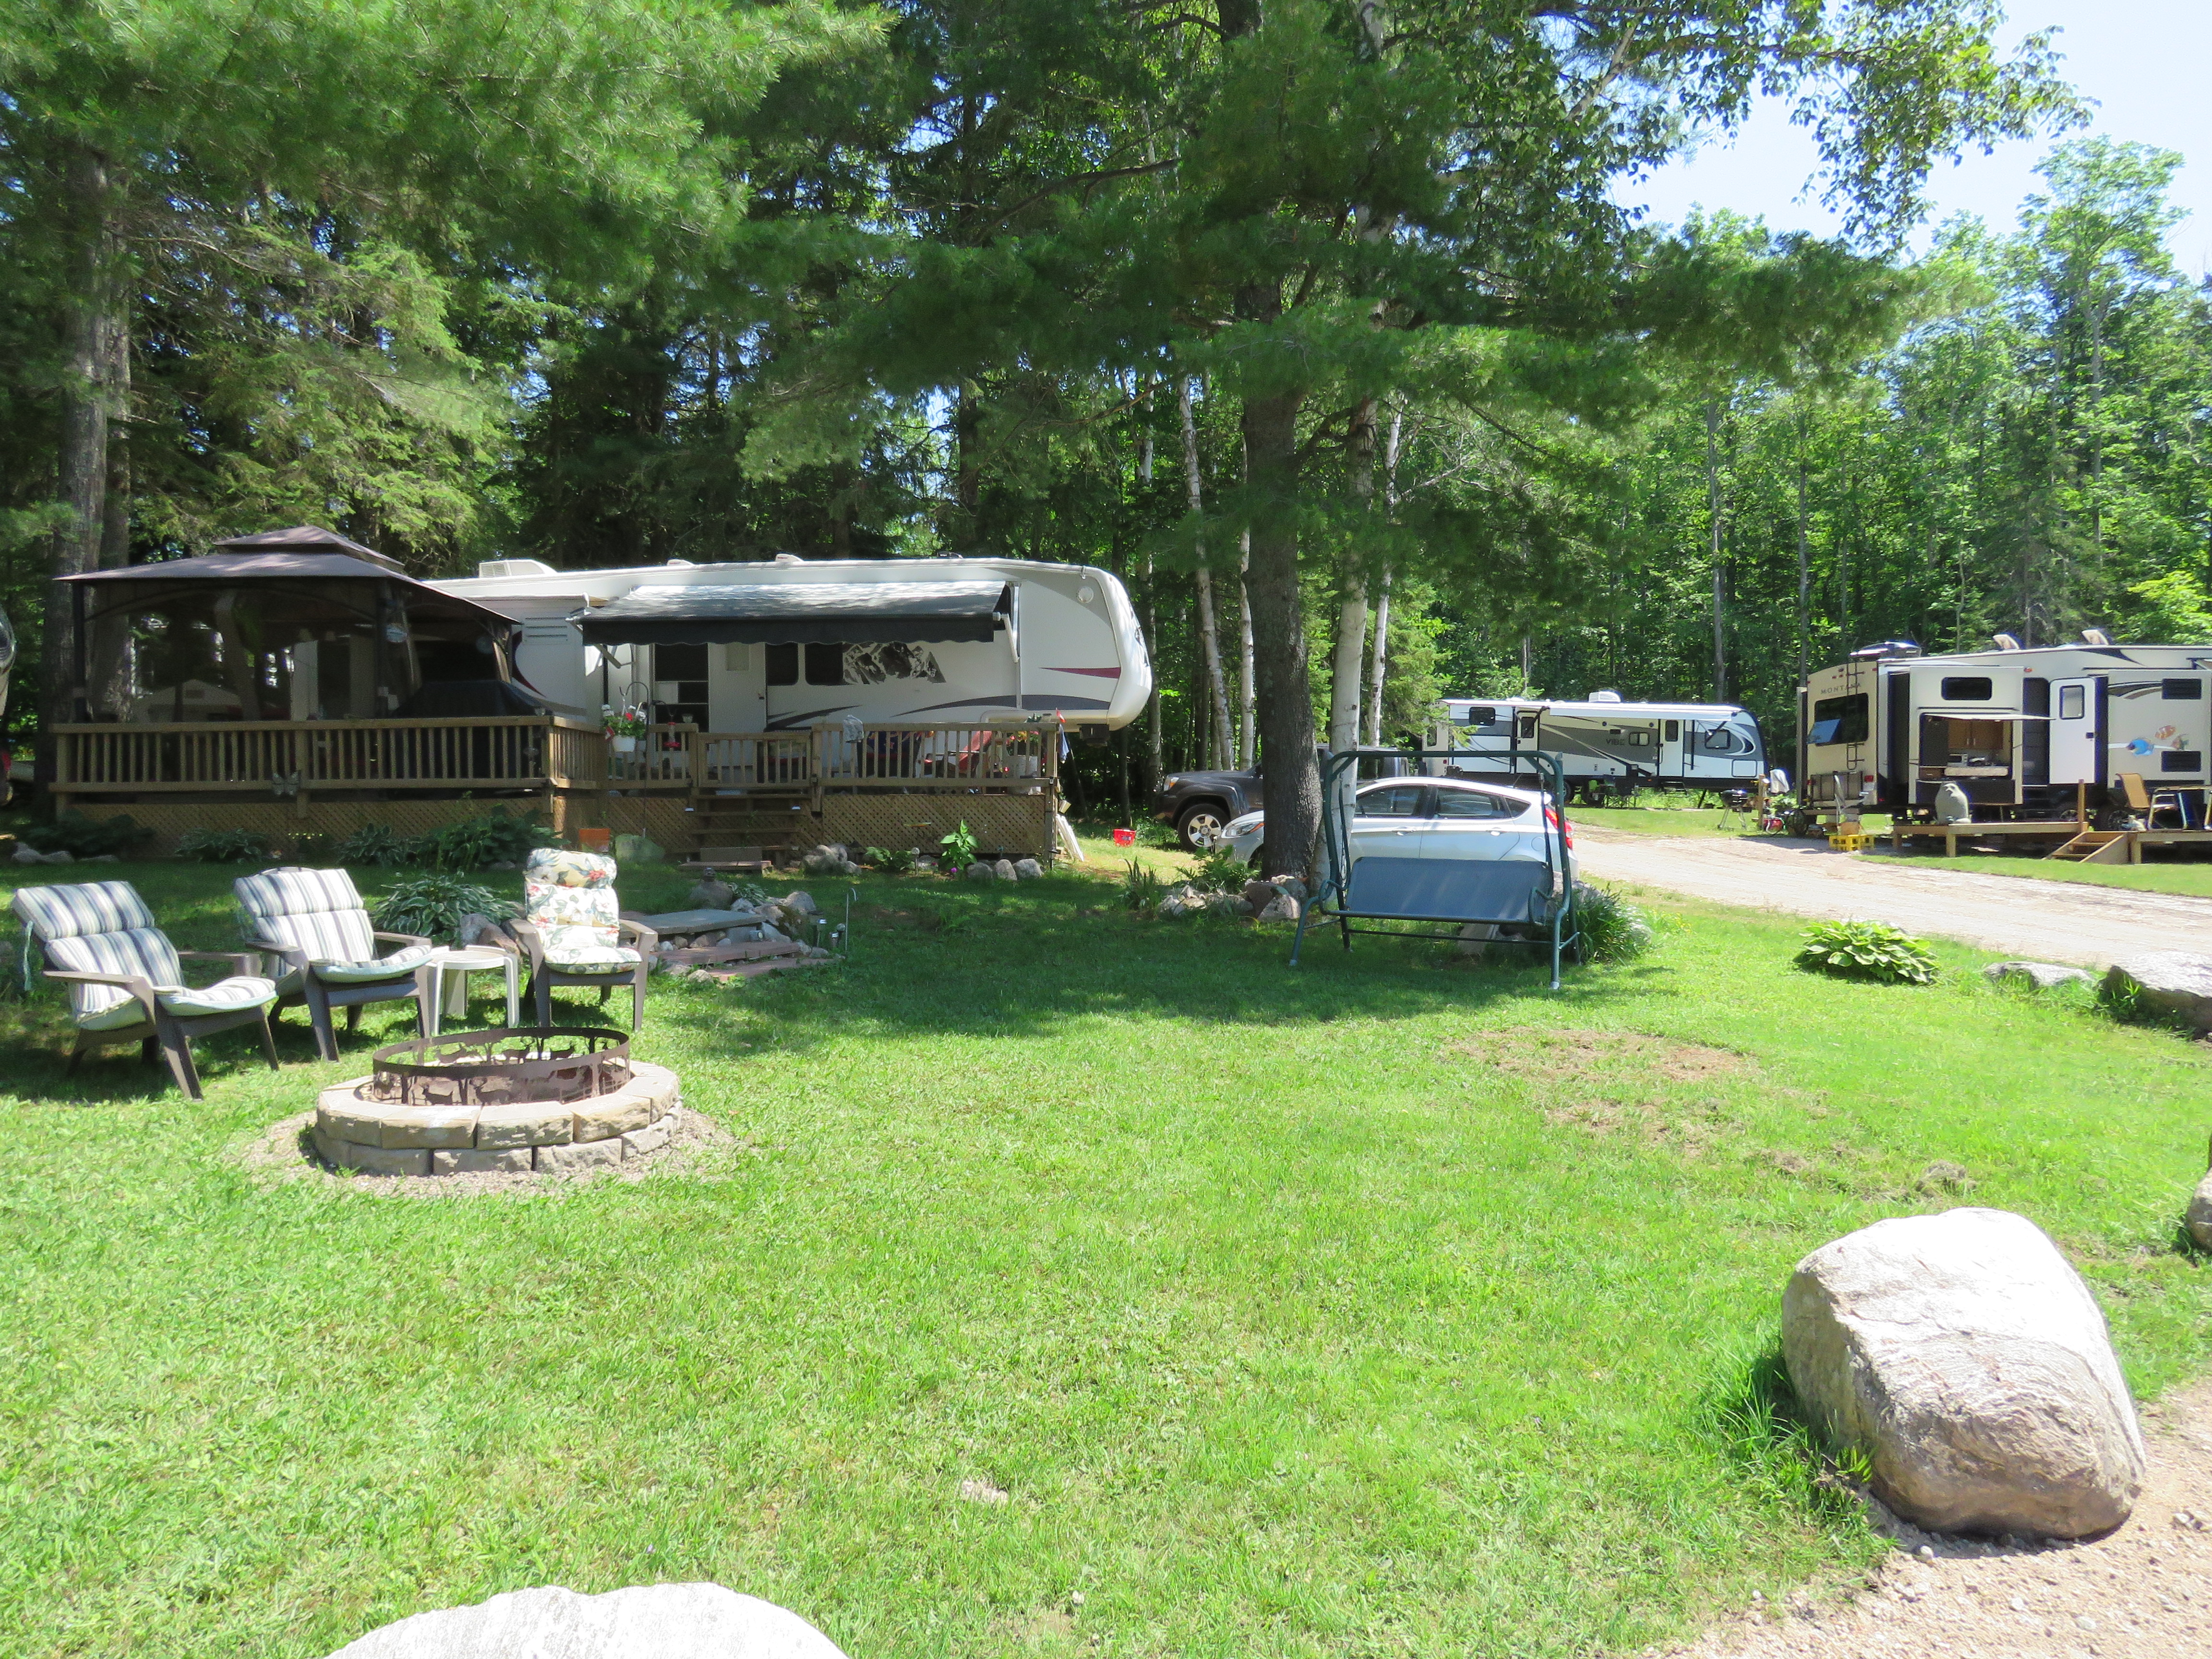 The “Do It All” Camping Experience at Booth Landing Camping & Cottages